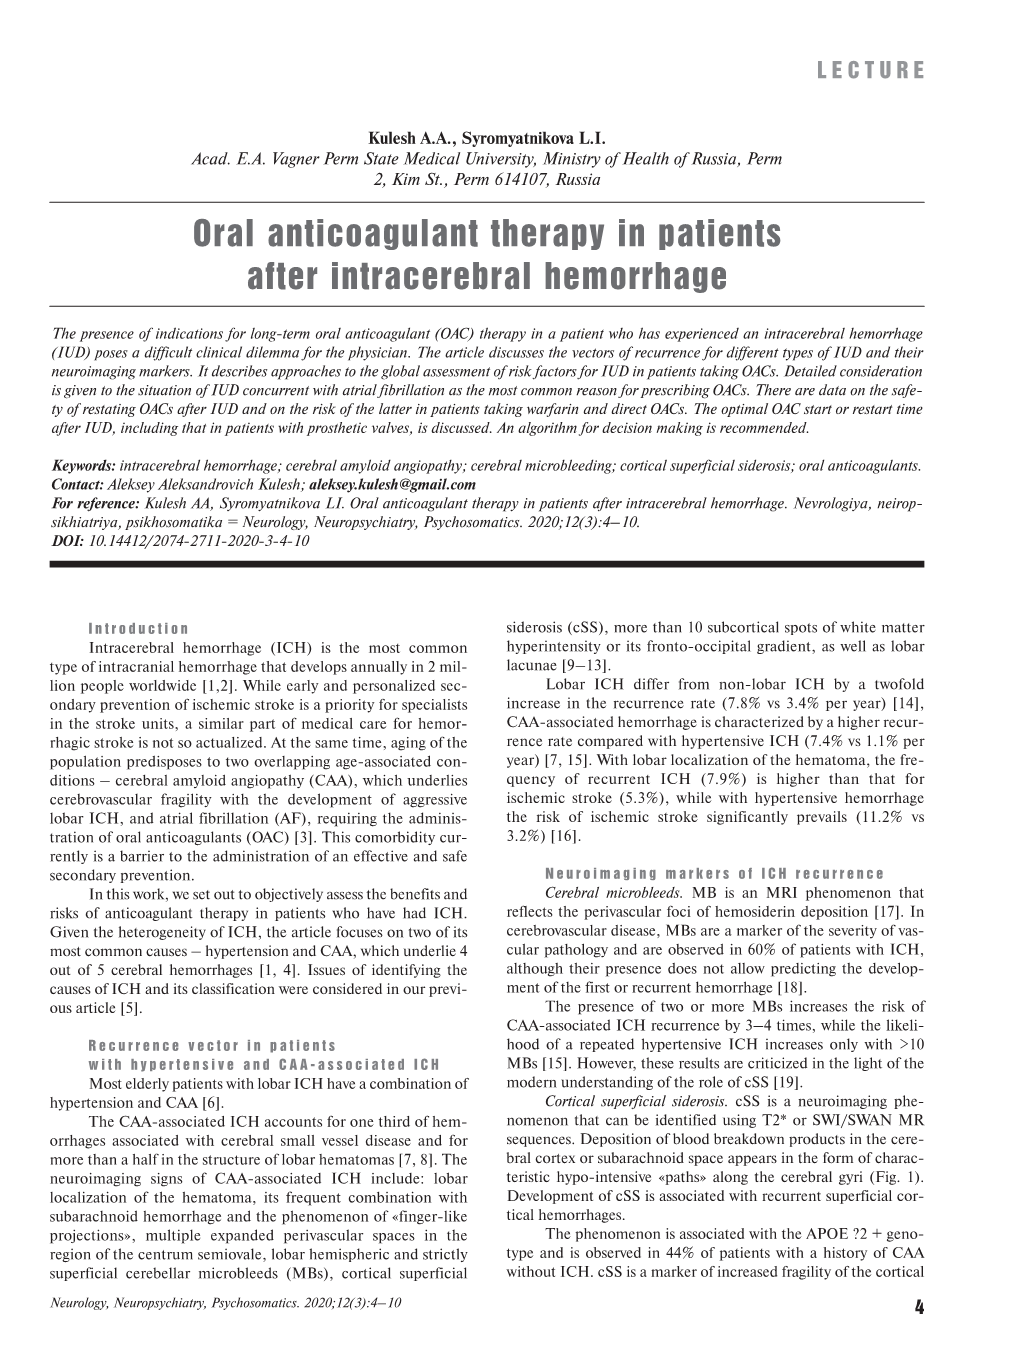 Oral Anticoagulant Therapy in Patients After Intracerebral Hemorrhage